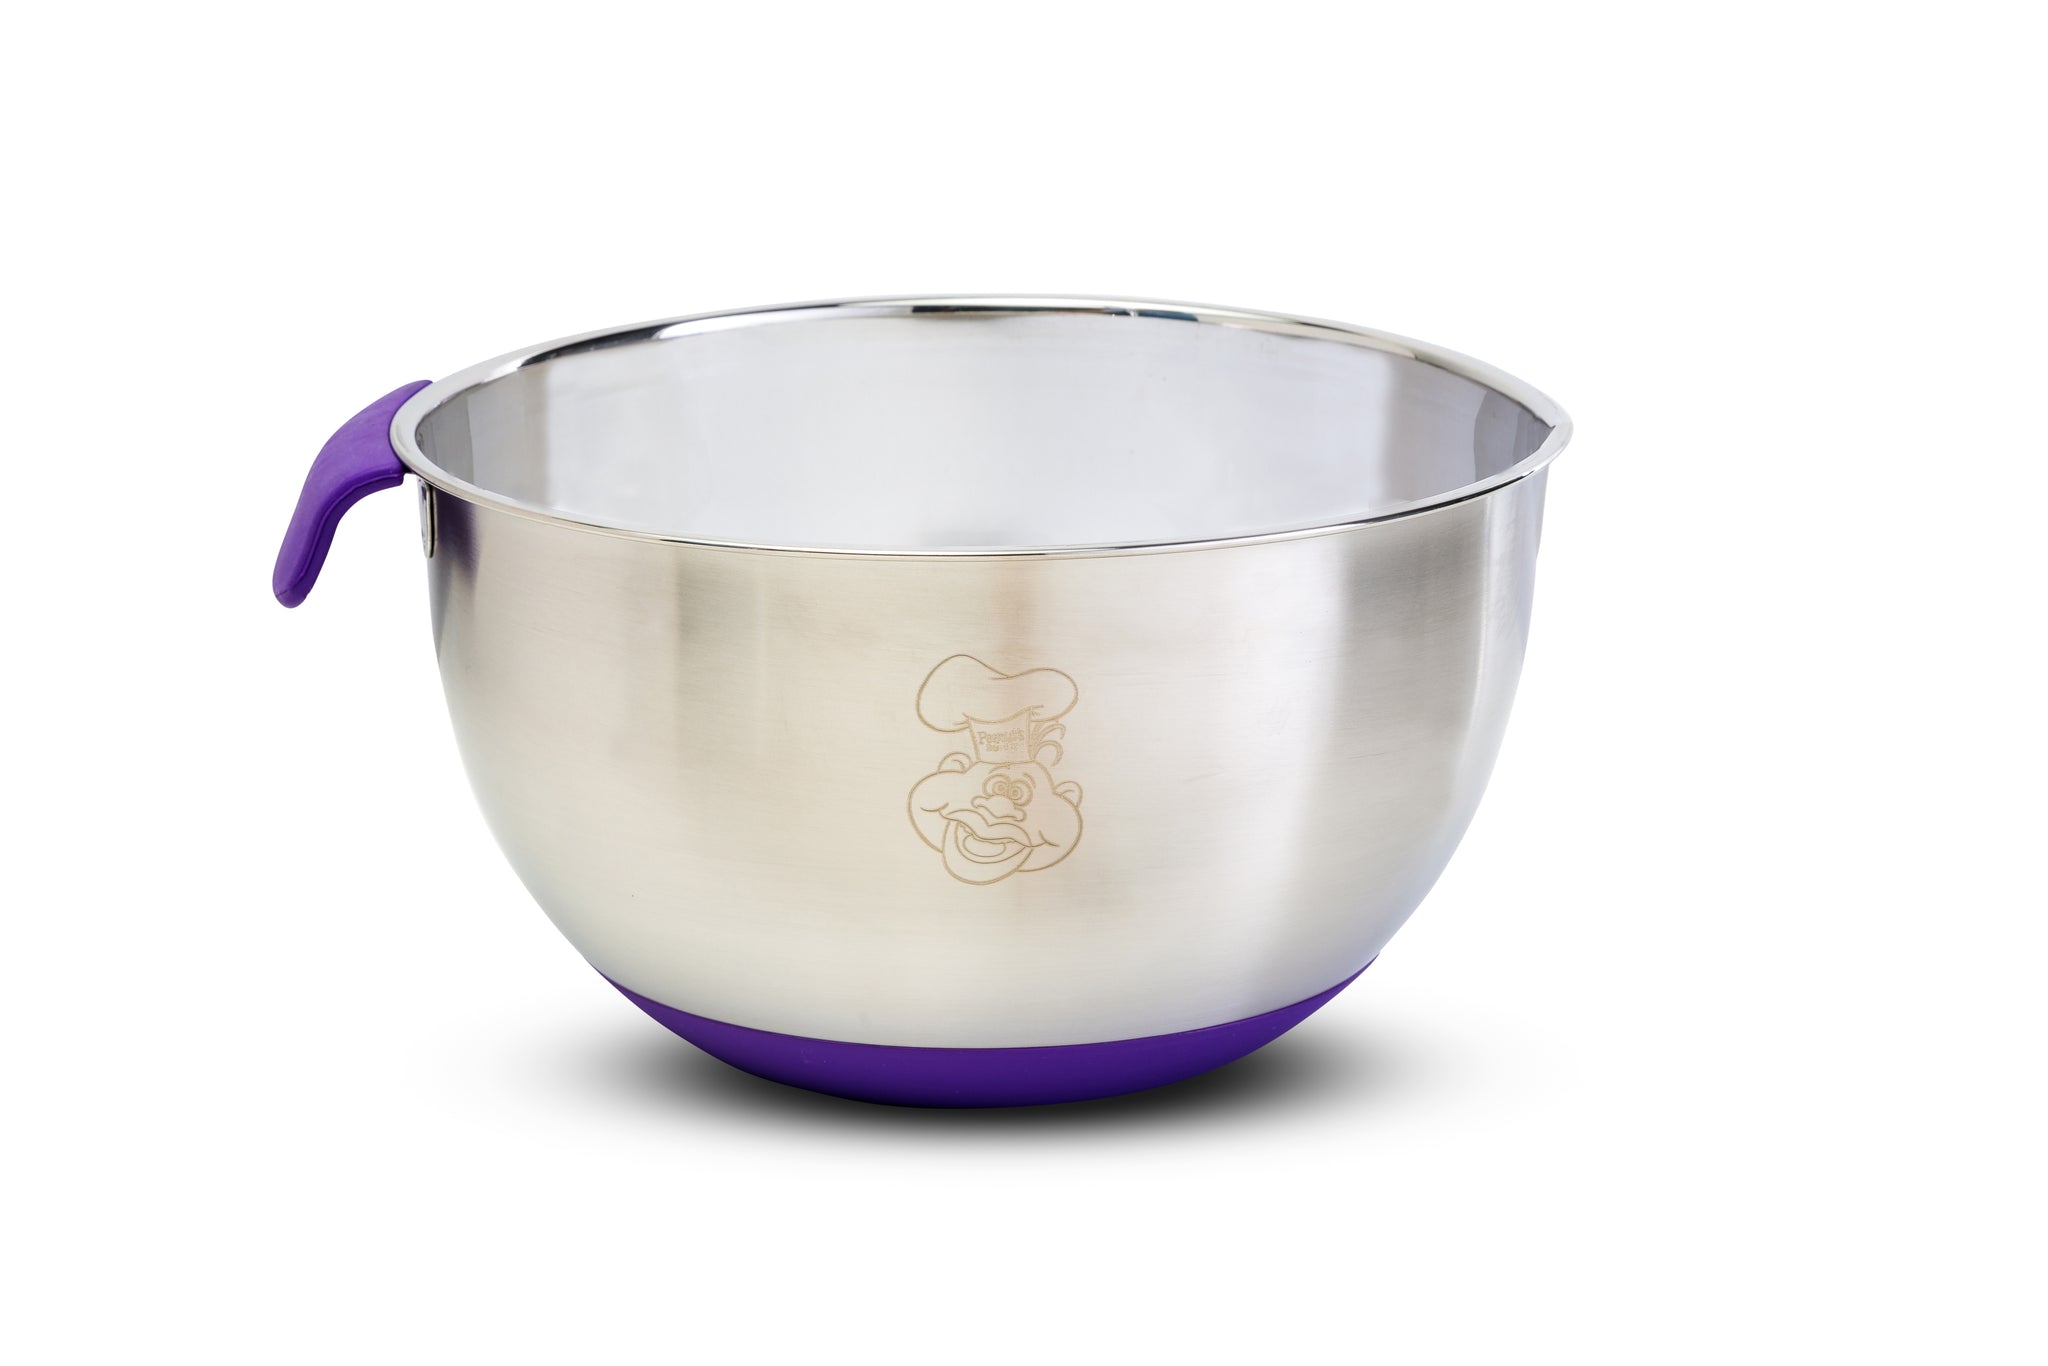 Peanut's Bake Shop Stainless Steel Mixing Bowl